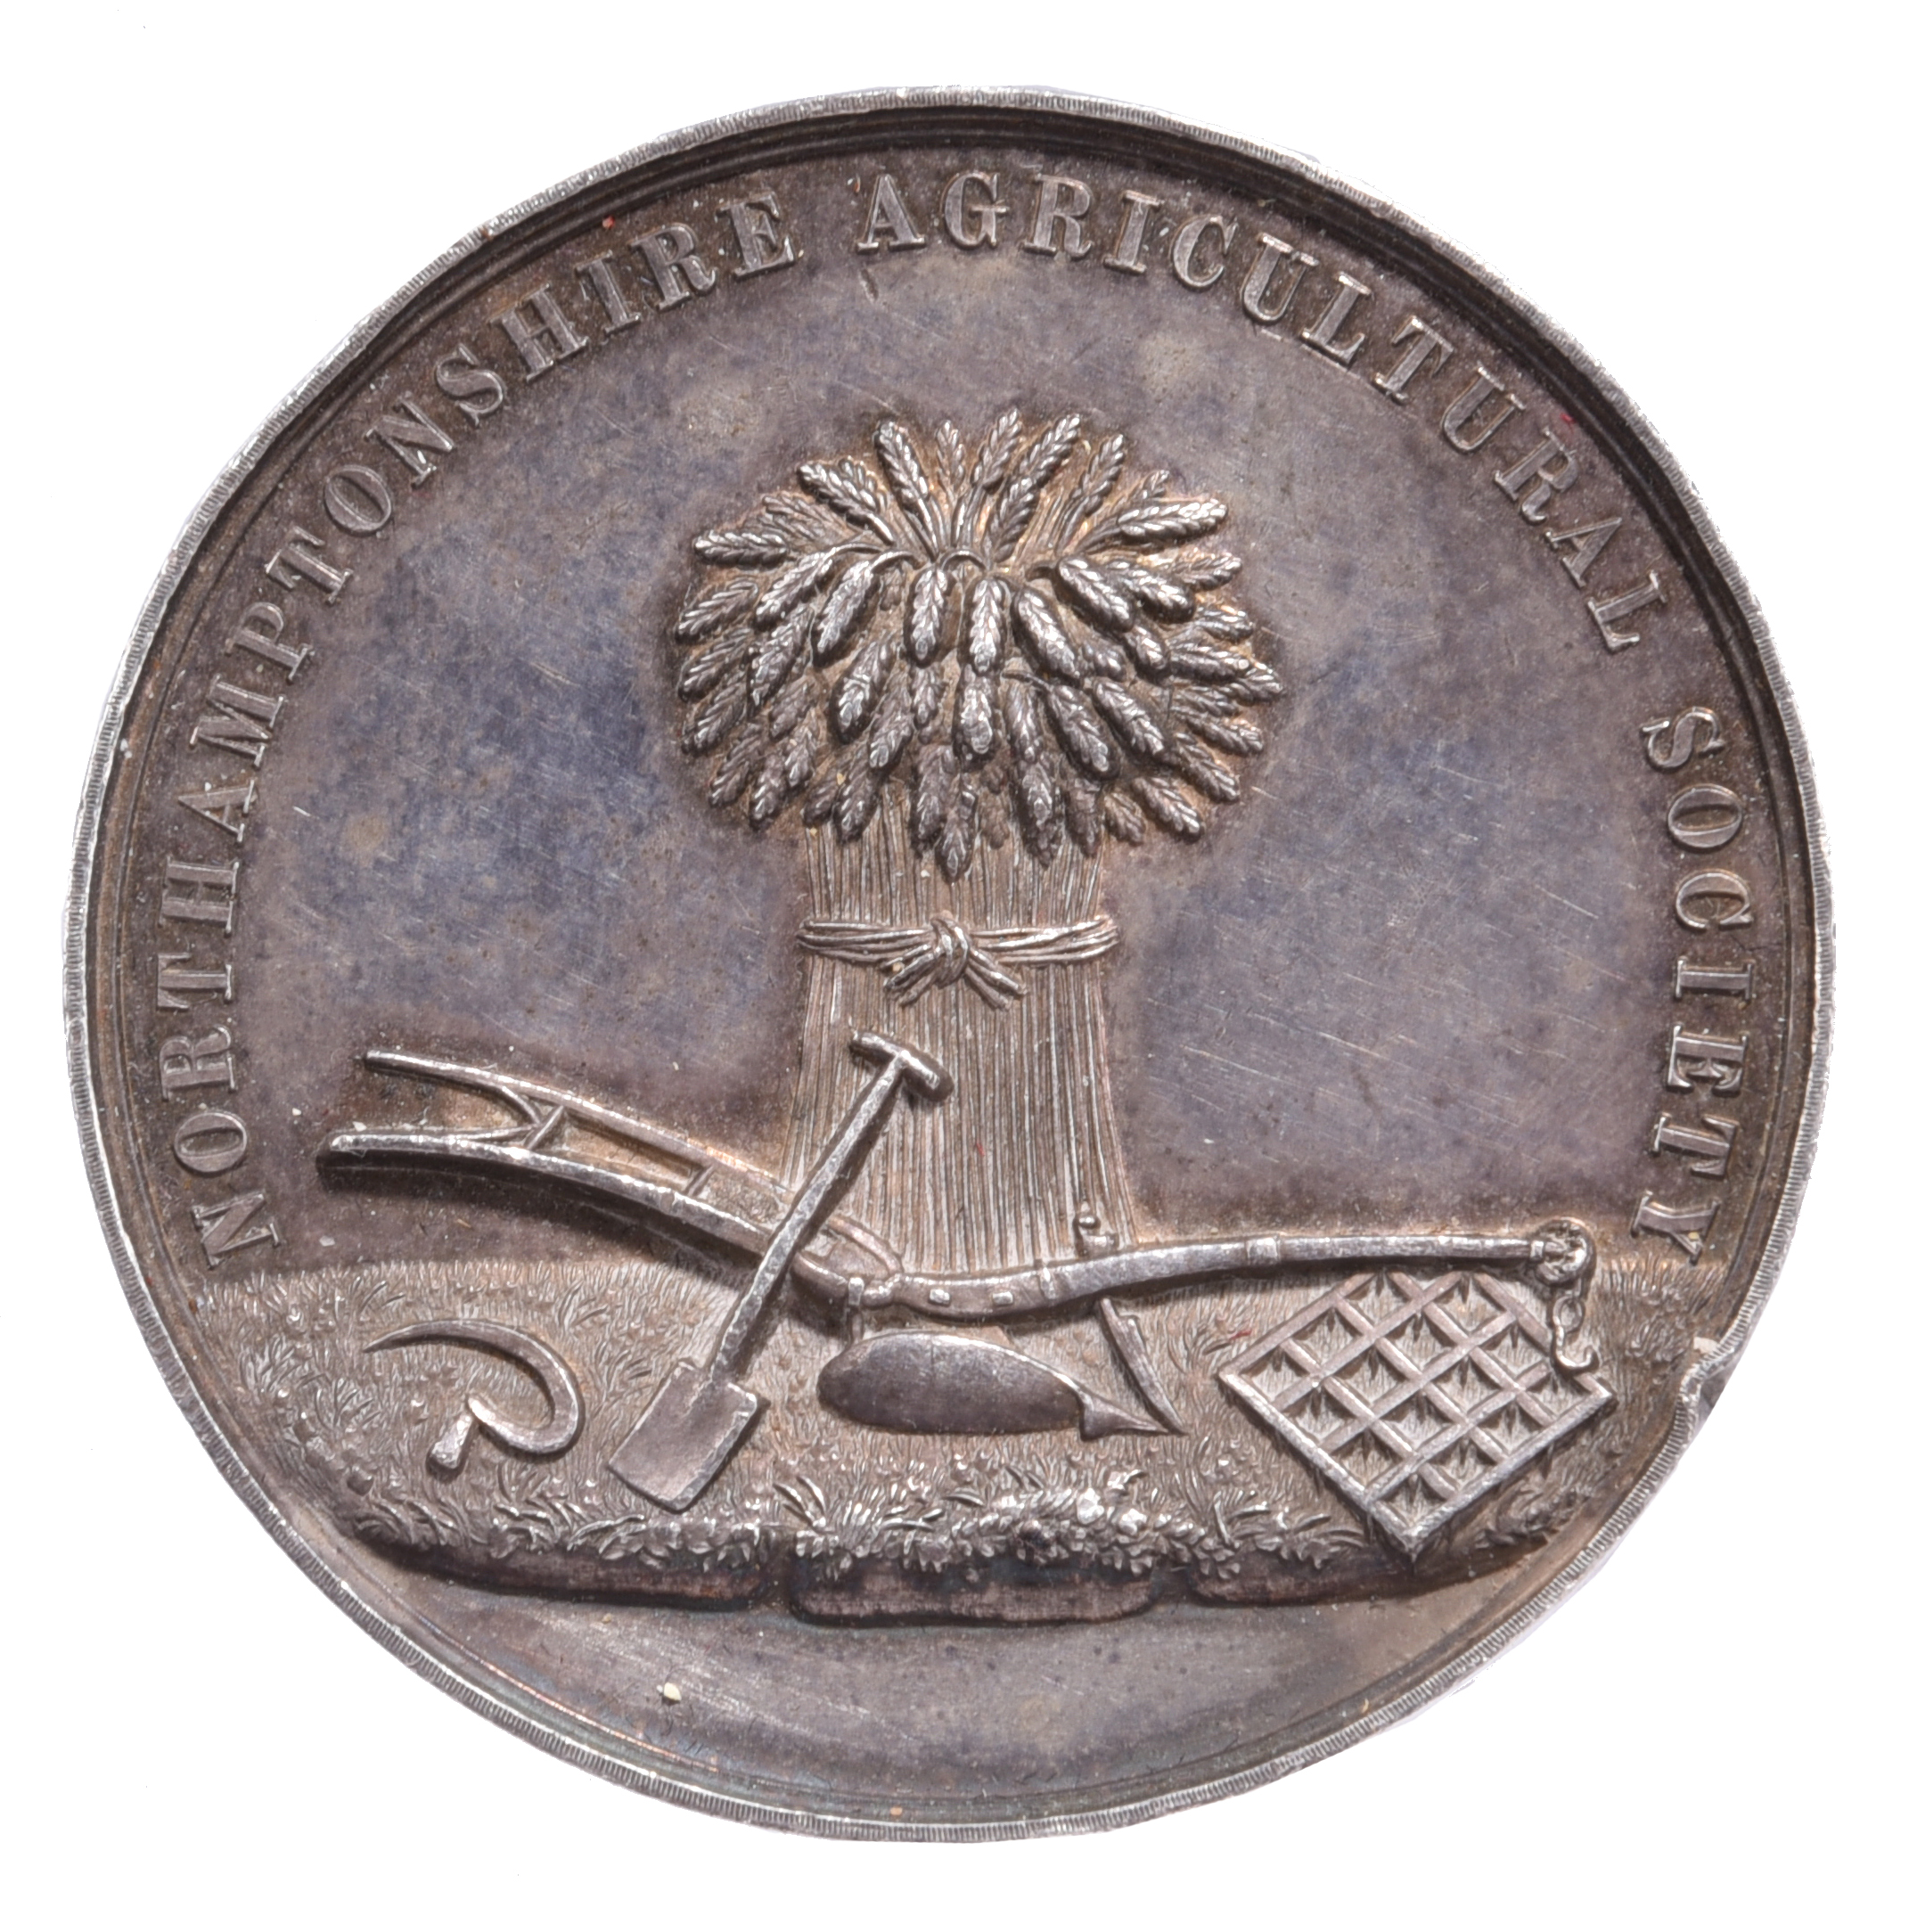 Northamptonshire Agricultural Society: a heavy silver prize medal: 51mm, a bushel of wheat with a